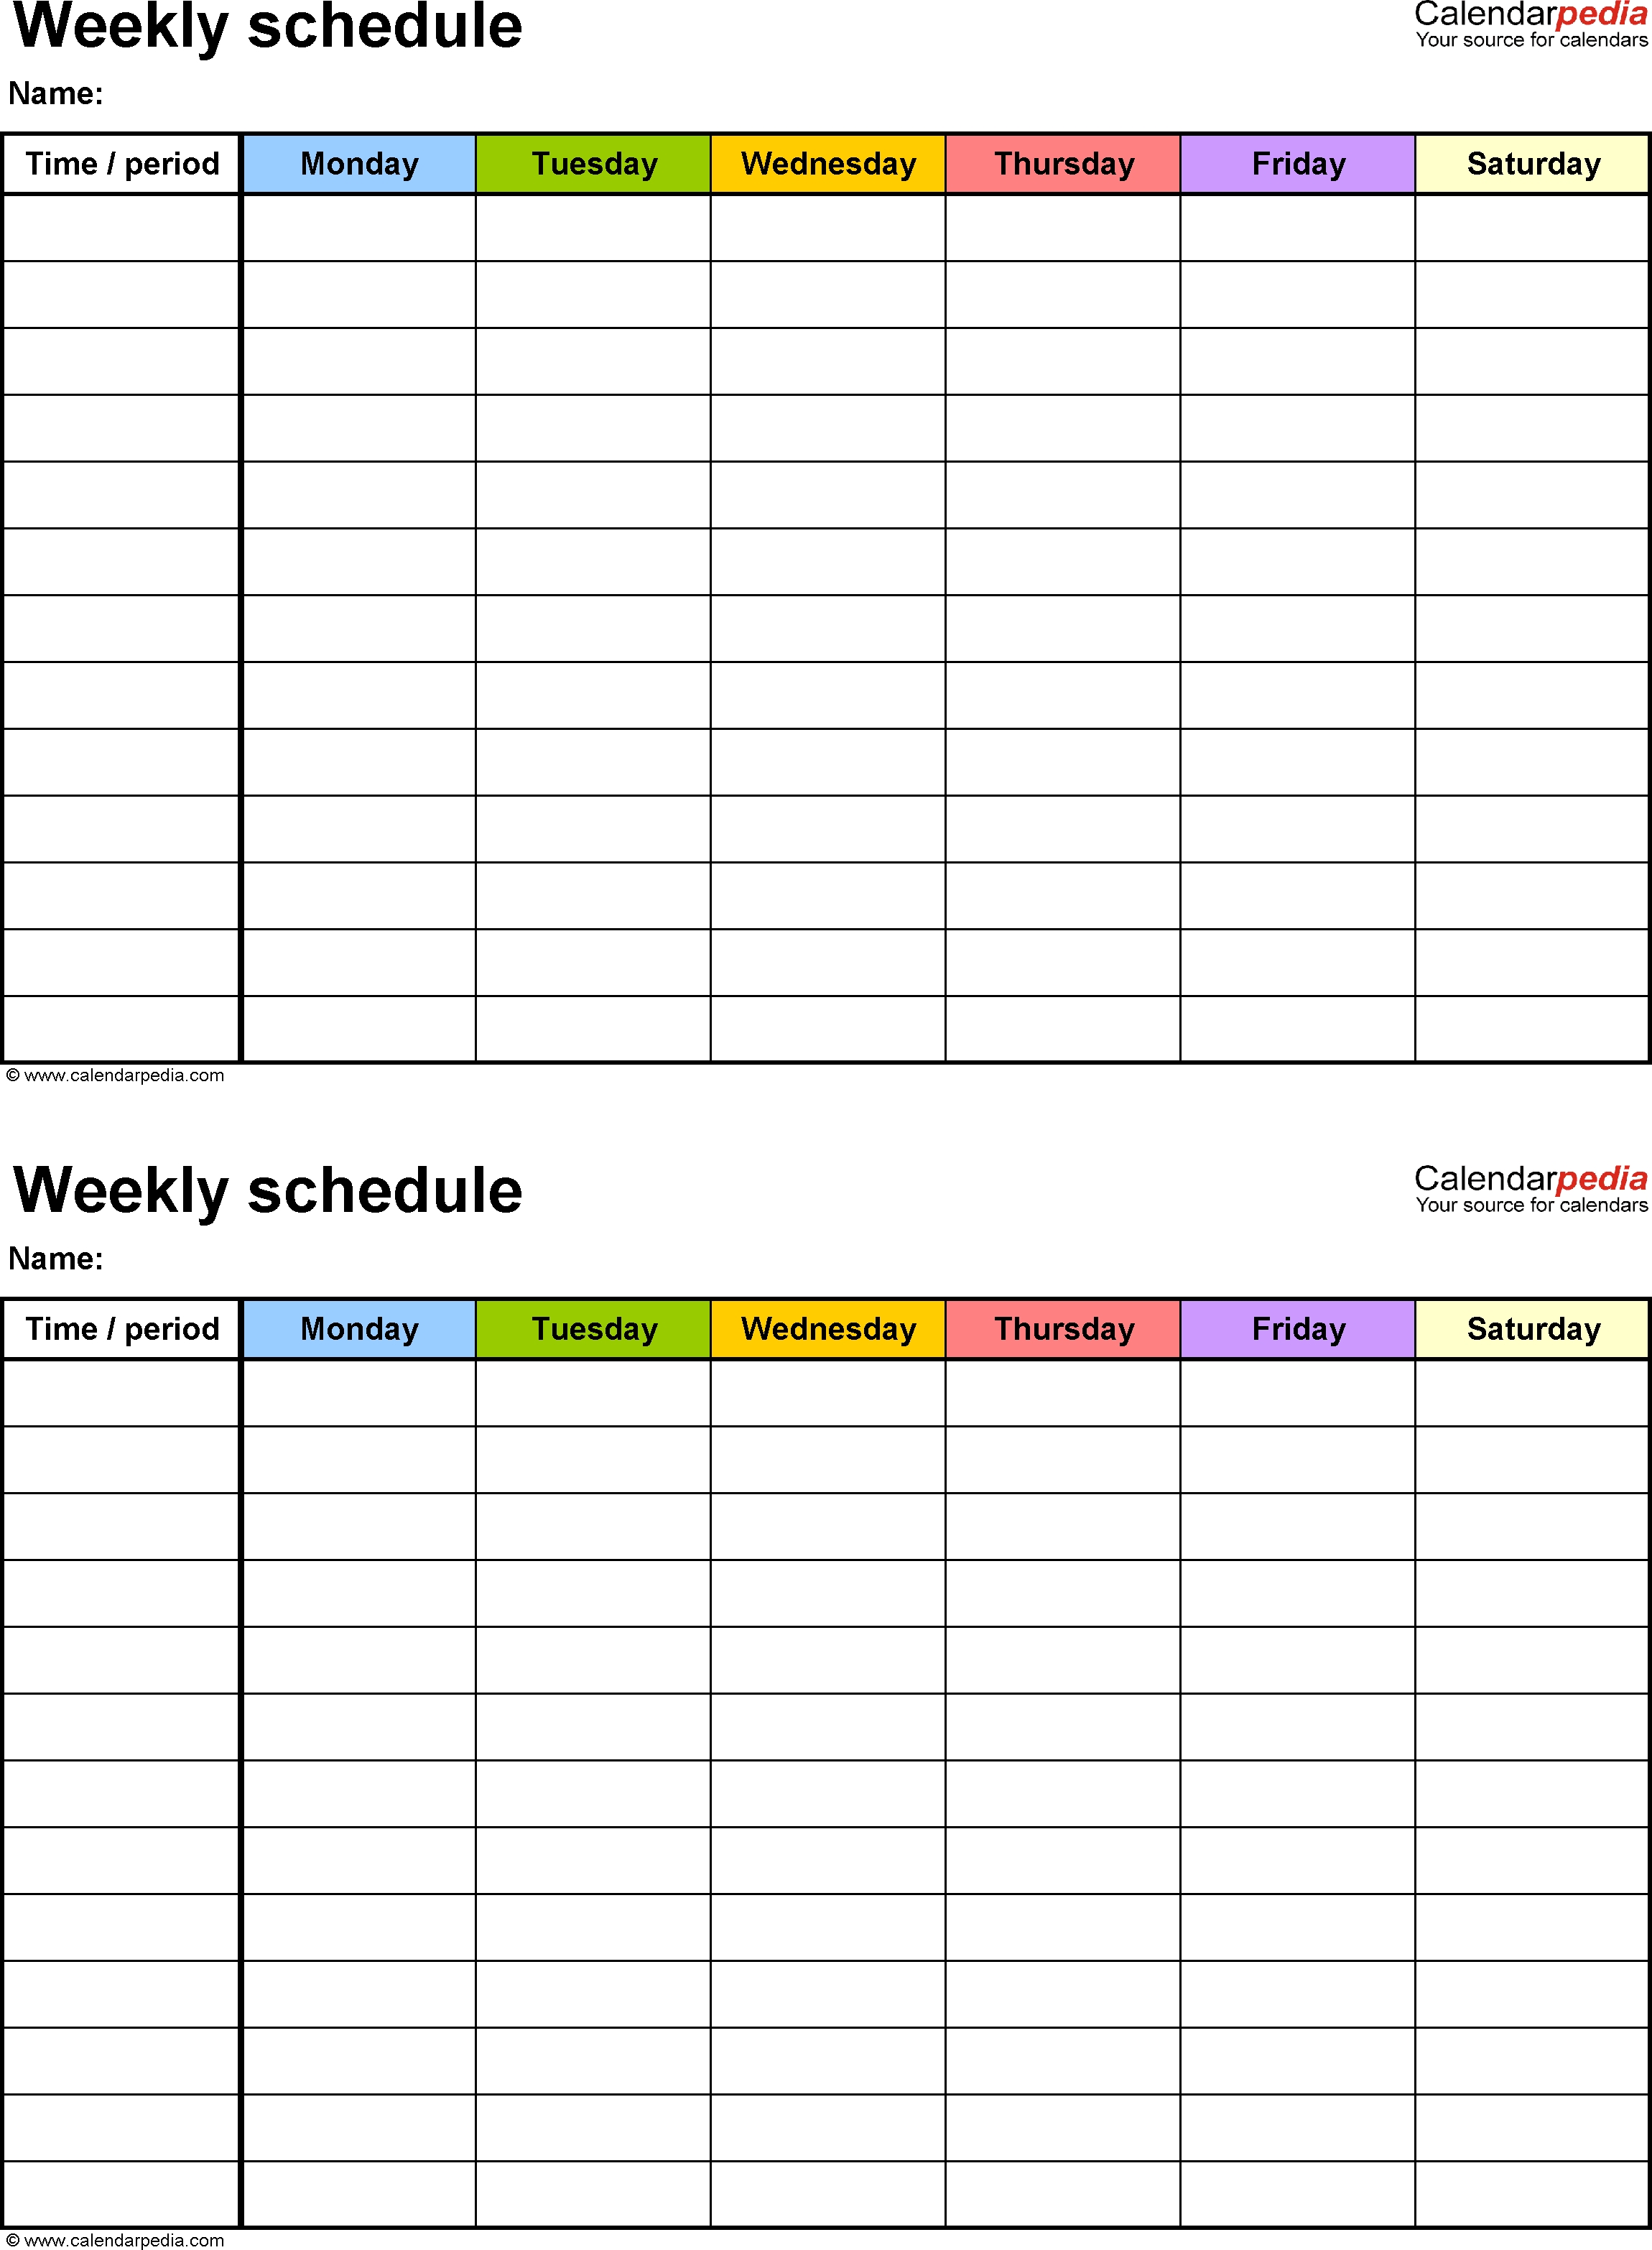 Free Weekly Schedule Templates For Excel - 18 Templates throughout Free Printable Weekly Planner Templates